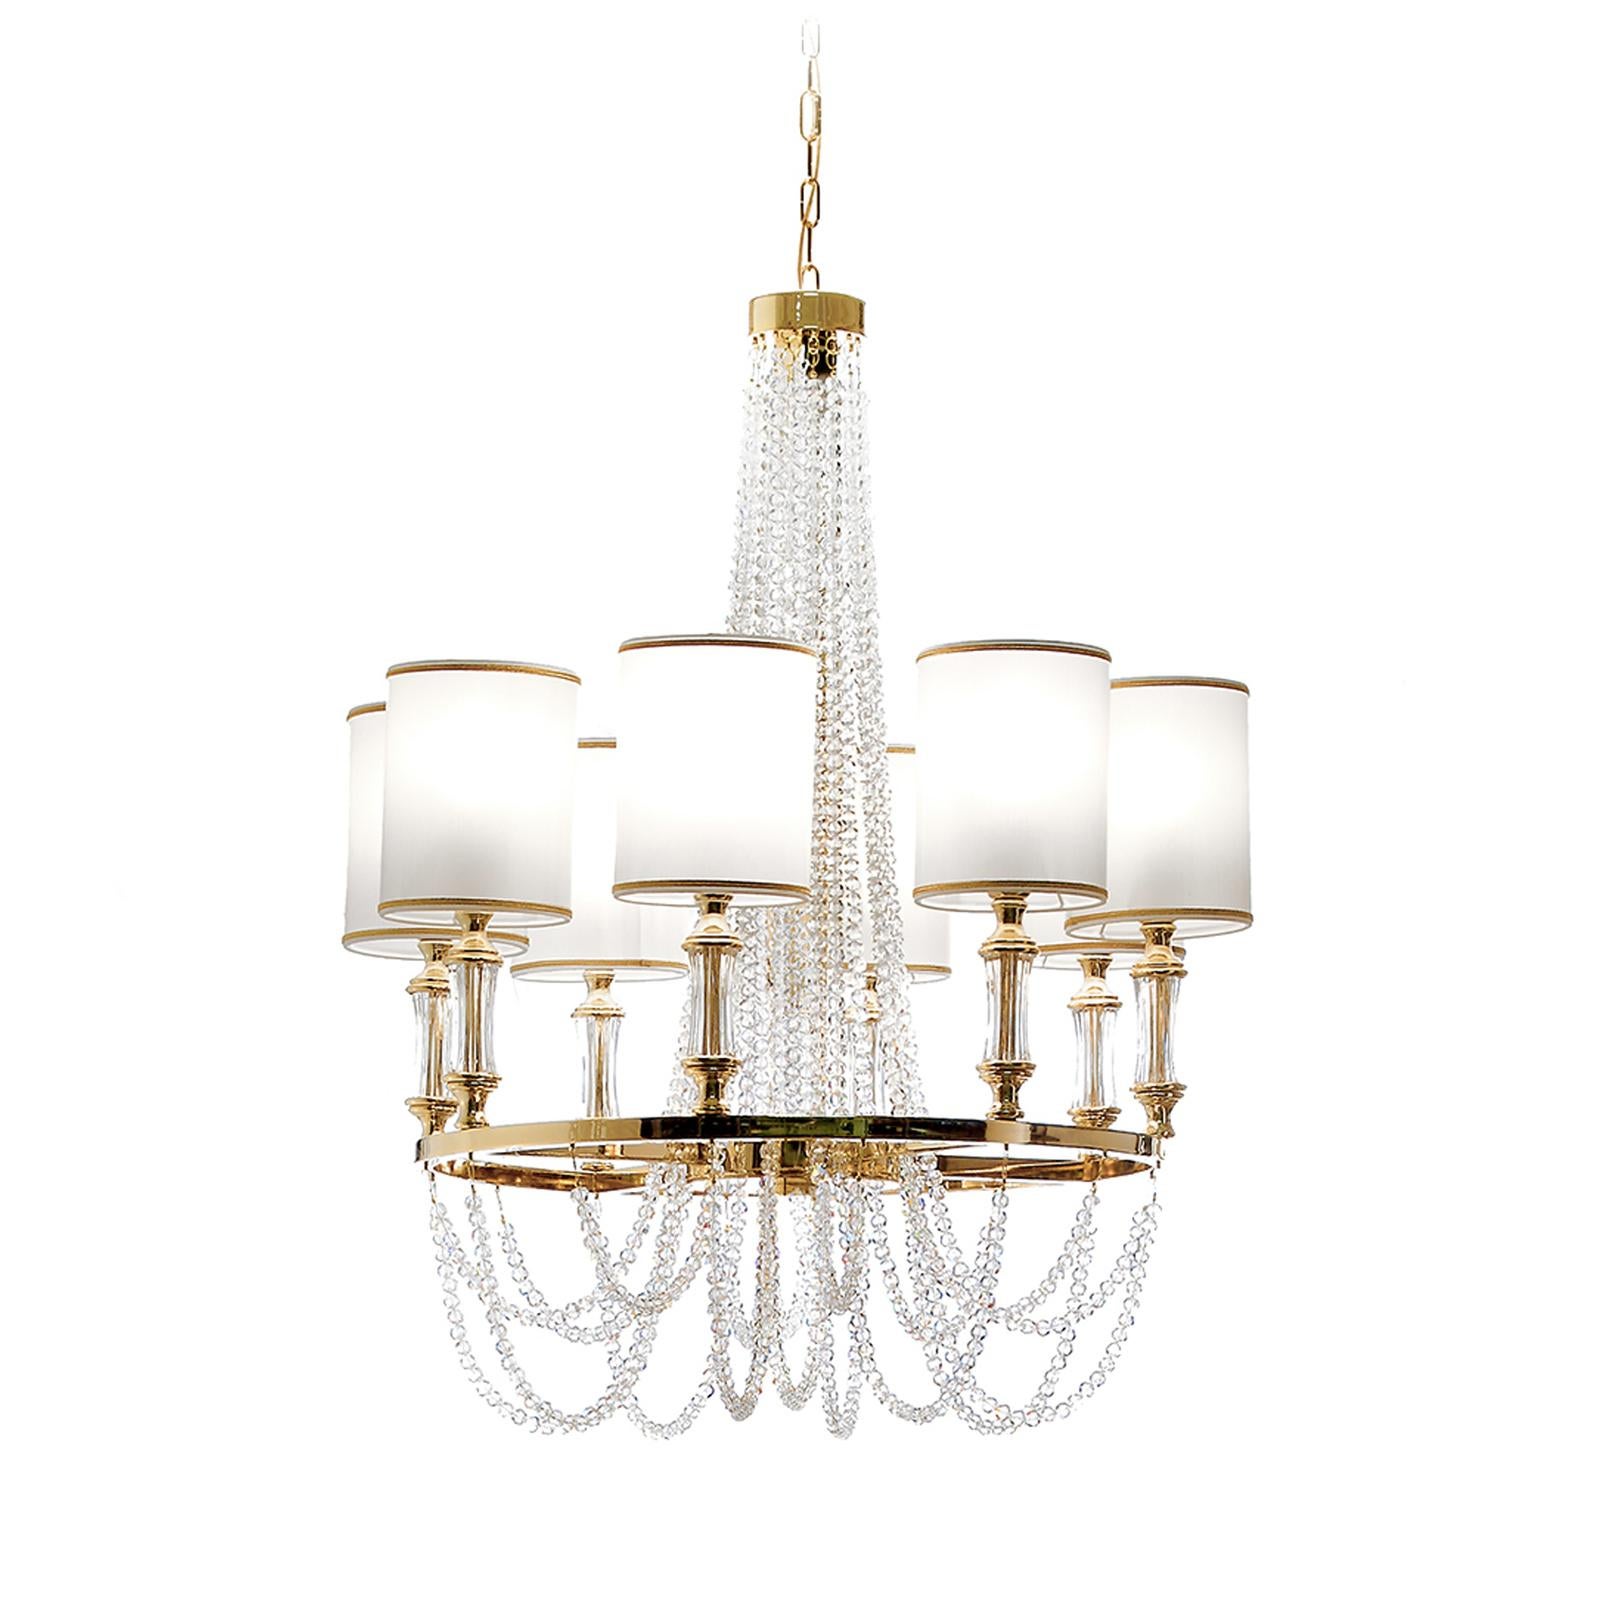 Inspired by Art Deco and crafted using traditional methods, this exquisite chandelier has a Classic design that creates a romantic setting in a bedroom, entryway, or living room. The metal structure is skillfully welded and brushed by hand with a